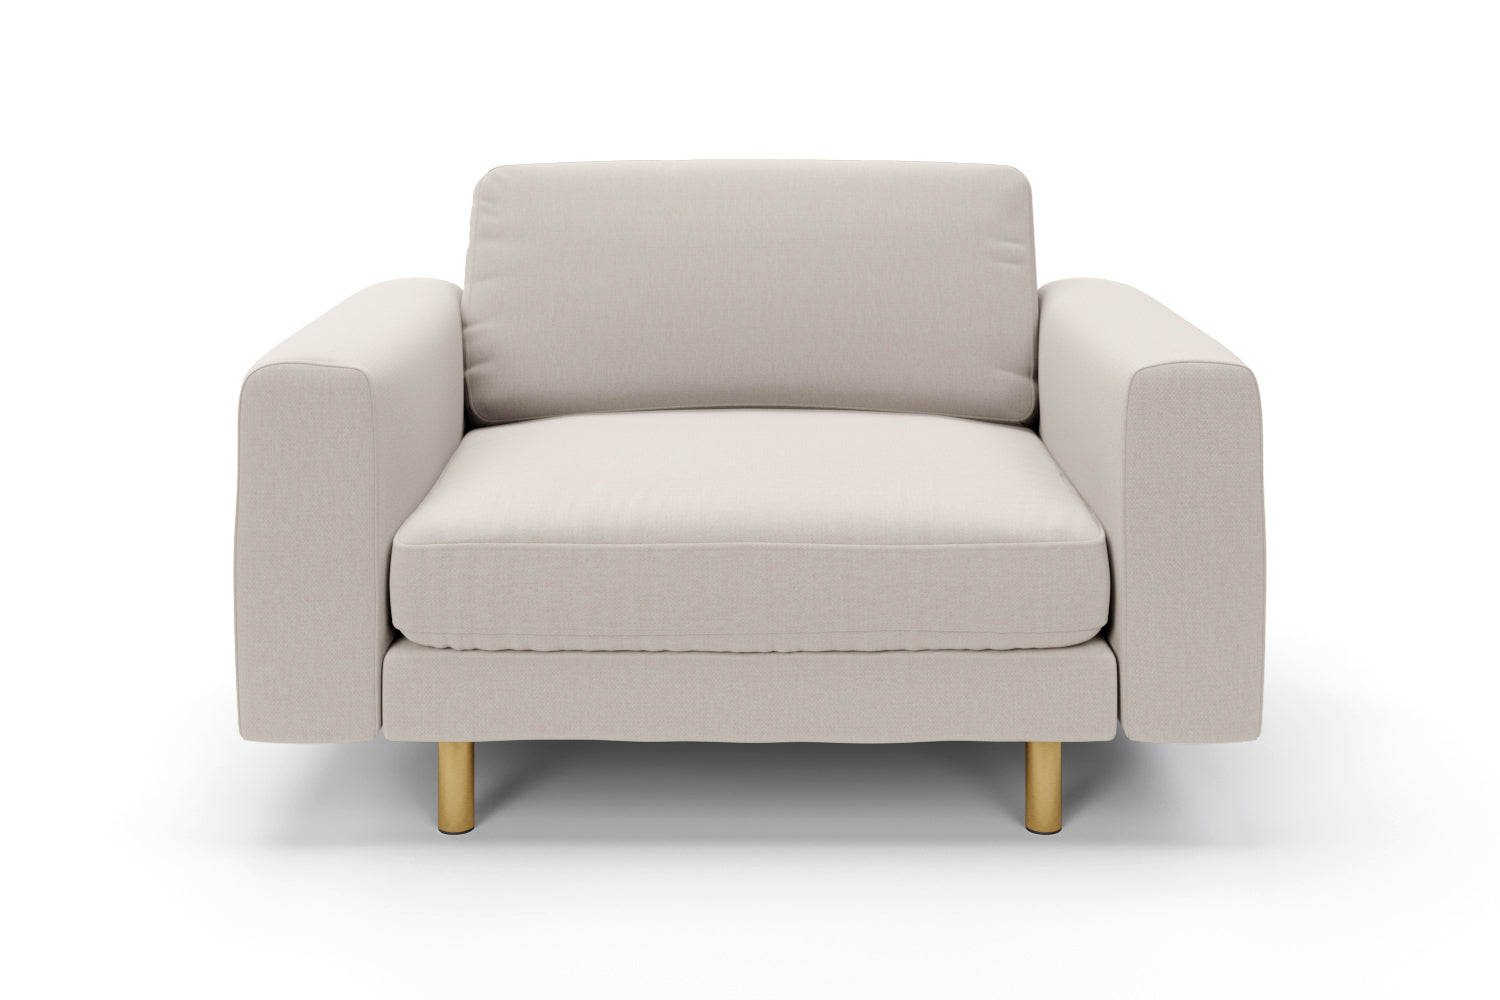 SNUG | The Big Chill 1.5 Seater Snuggler in Biscuit variant_40520436711472